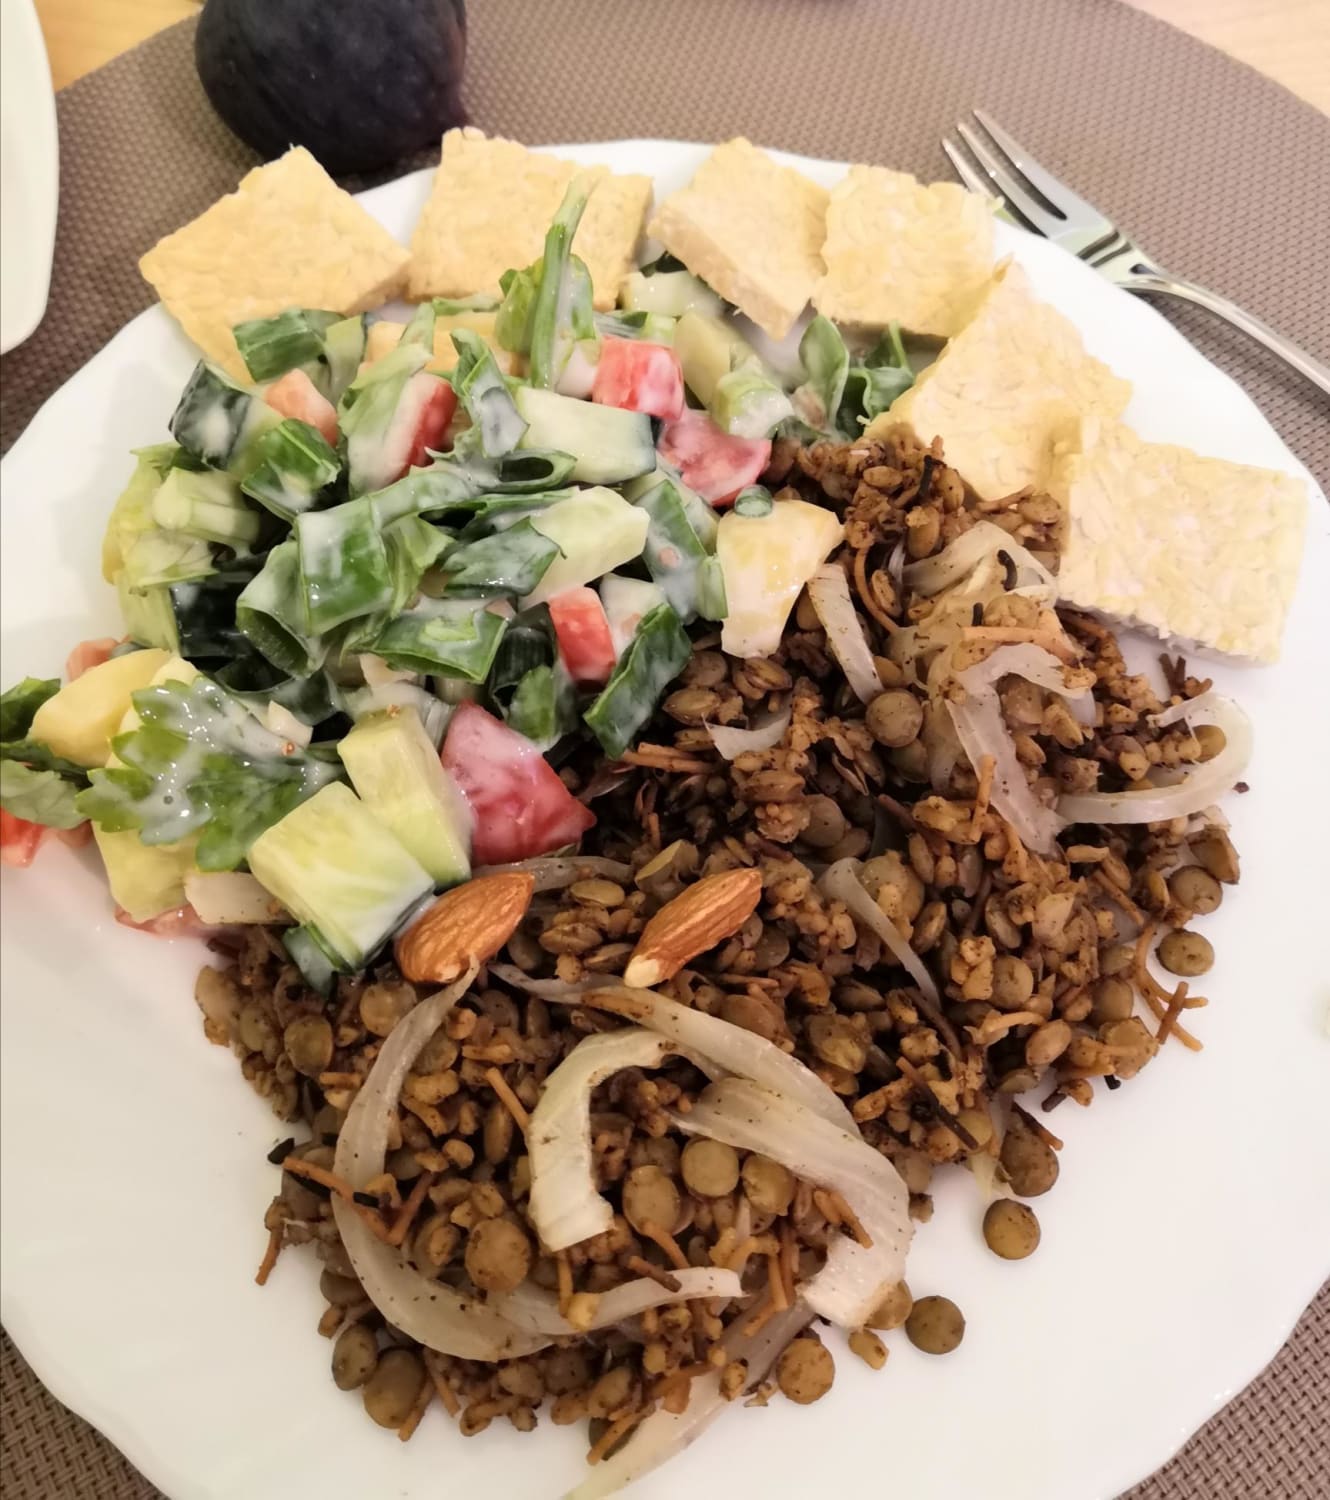 My own interpretation of mujadara: Bulgur, brown lentils cooked with cumin, coriander, cinnamon, allspice, cardamom, bay leaves. I added some pepper, a pinch of salt and the onions after it was cooked (onions were nuked in the mic). Eaten with a random salad